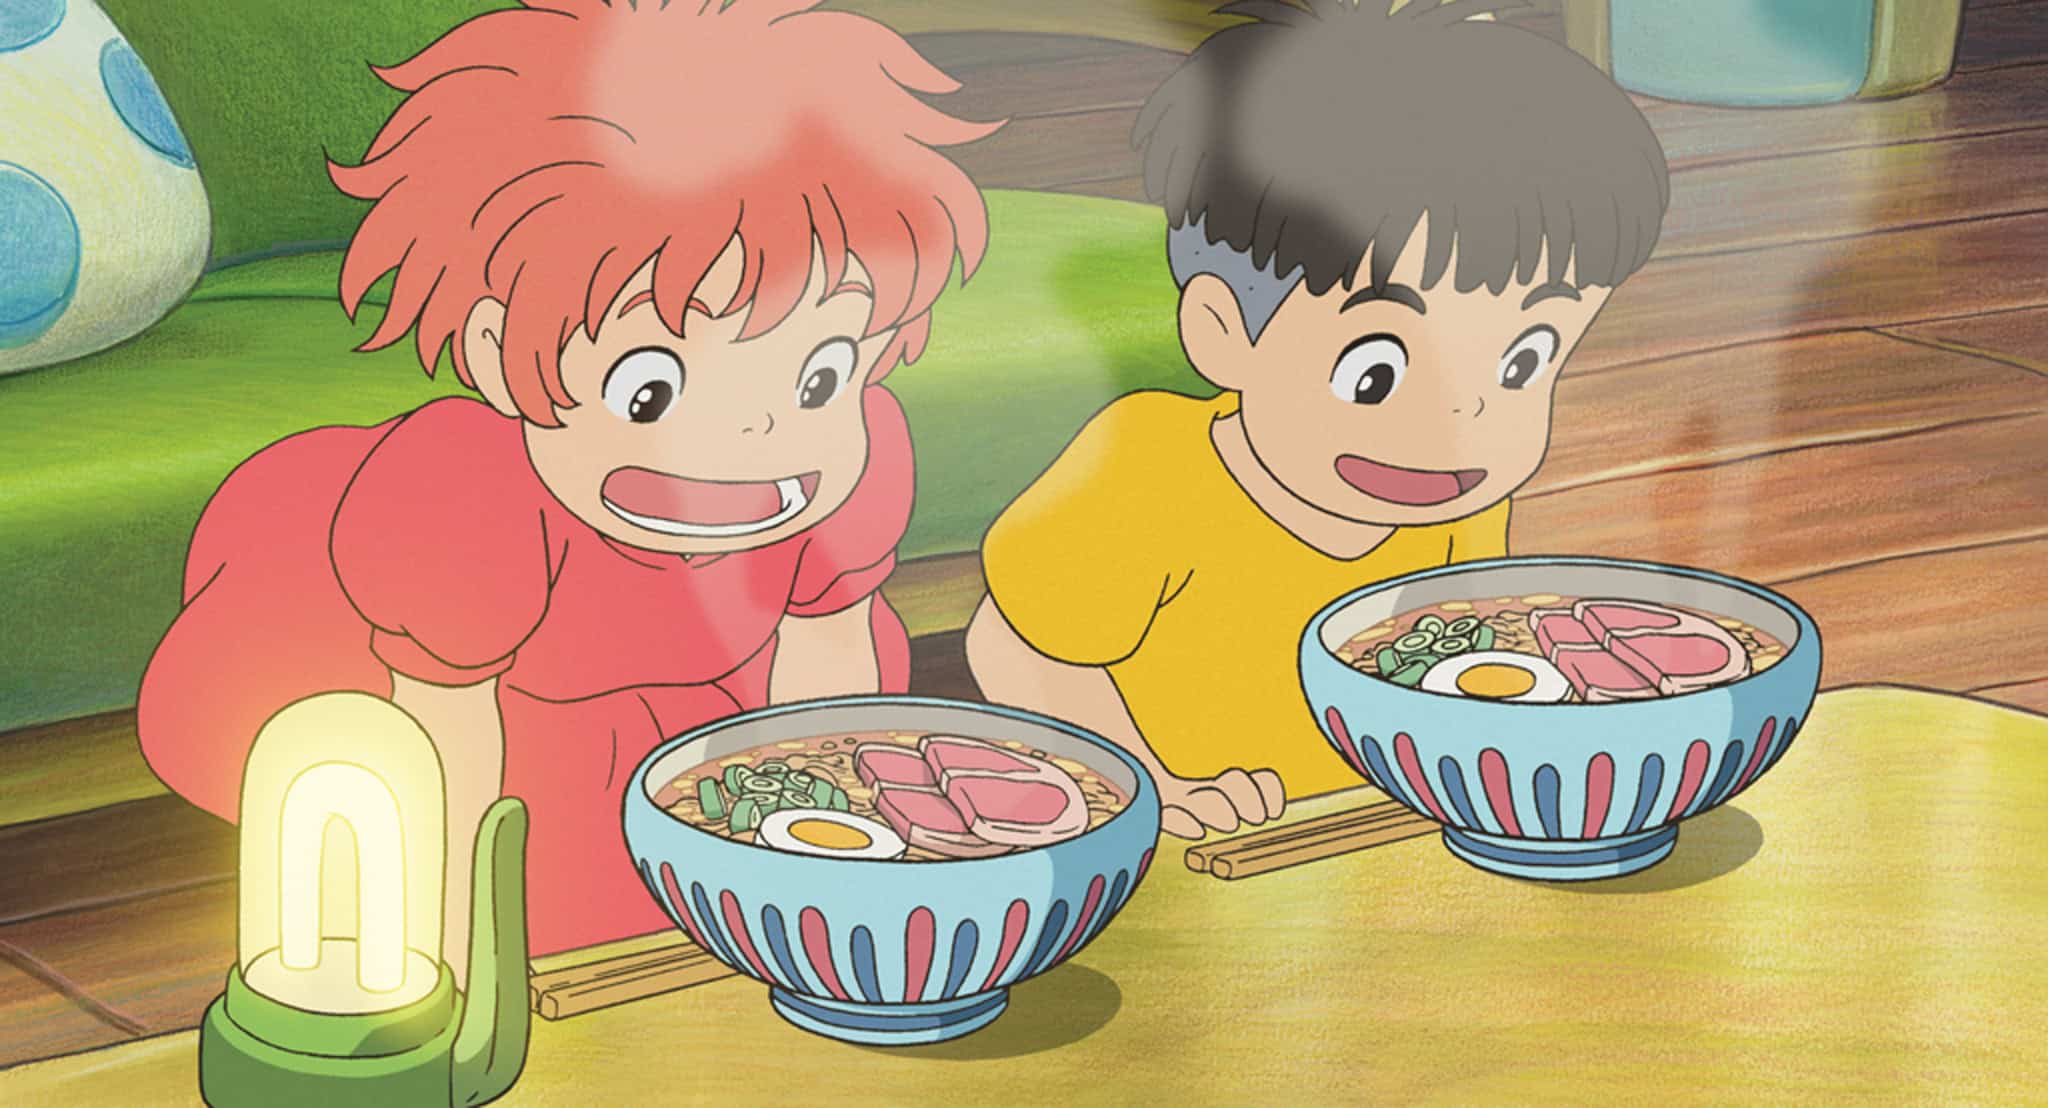 An animated girl and boy excited about ramen in this image from Studio Ghibli.